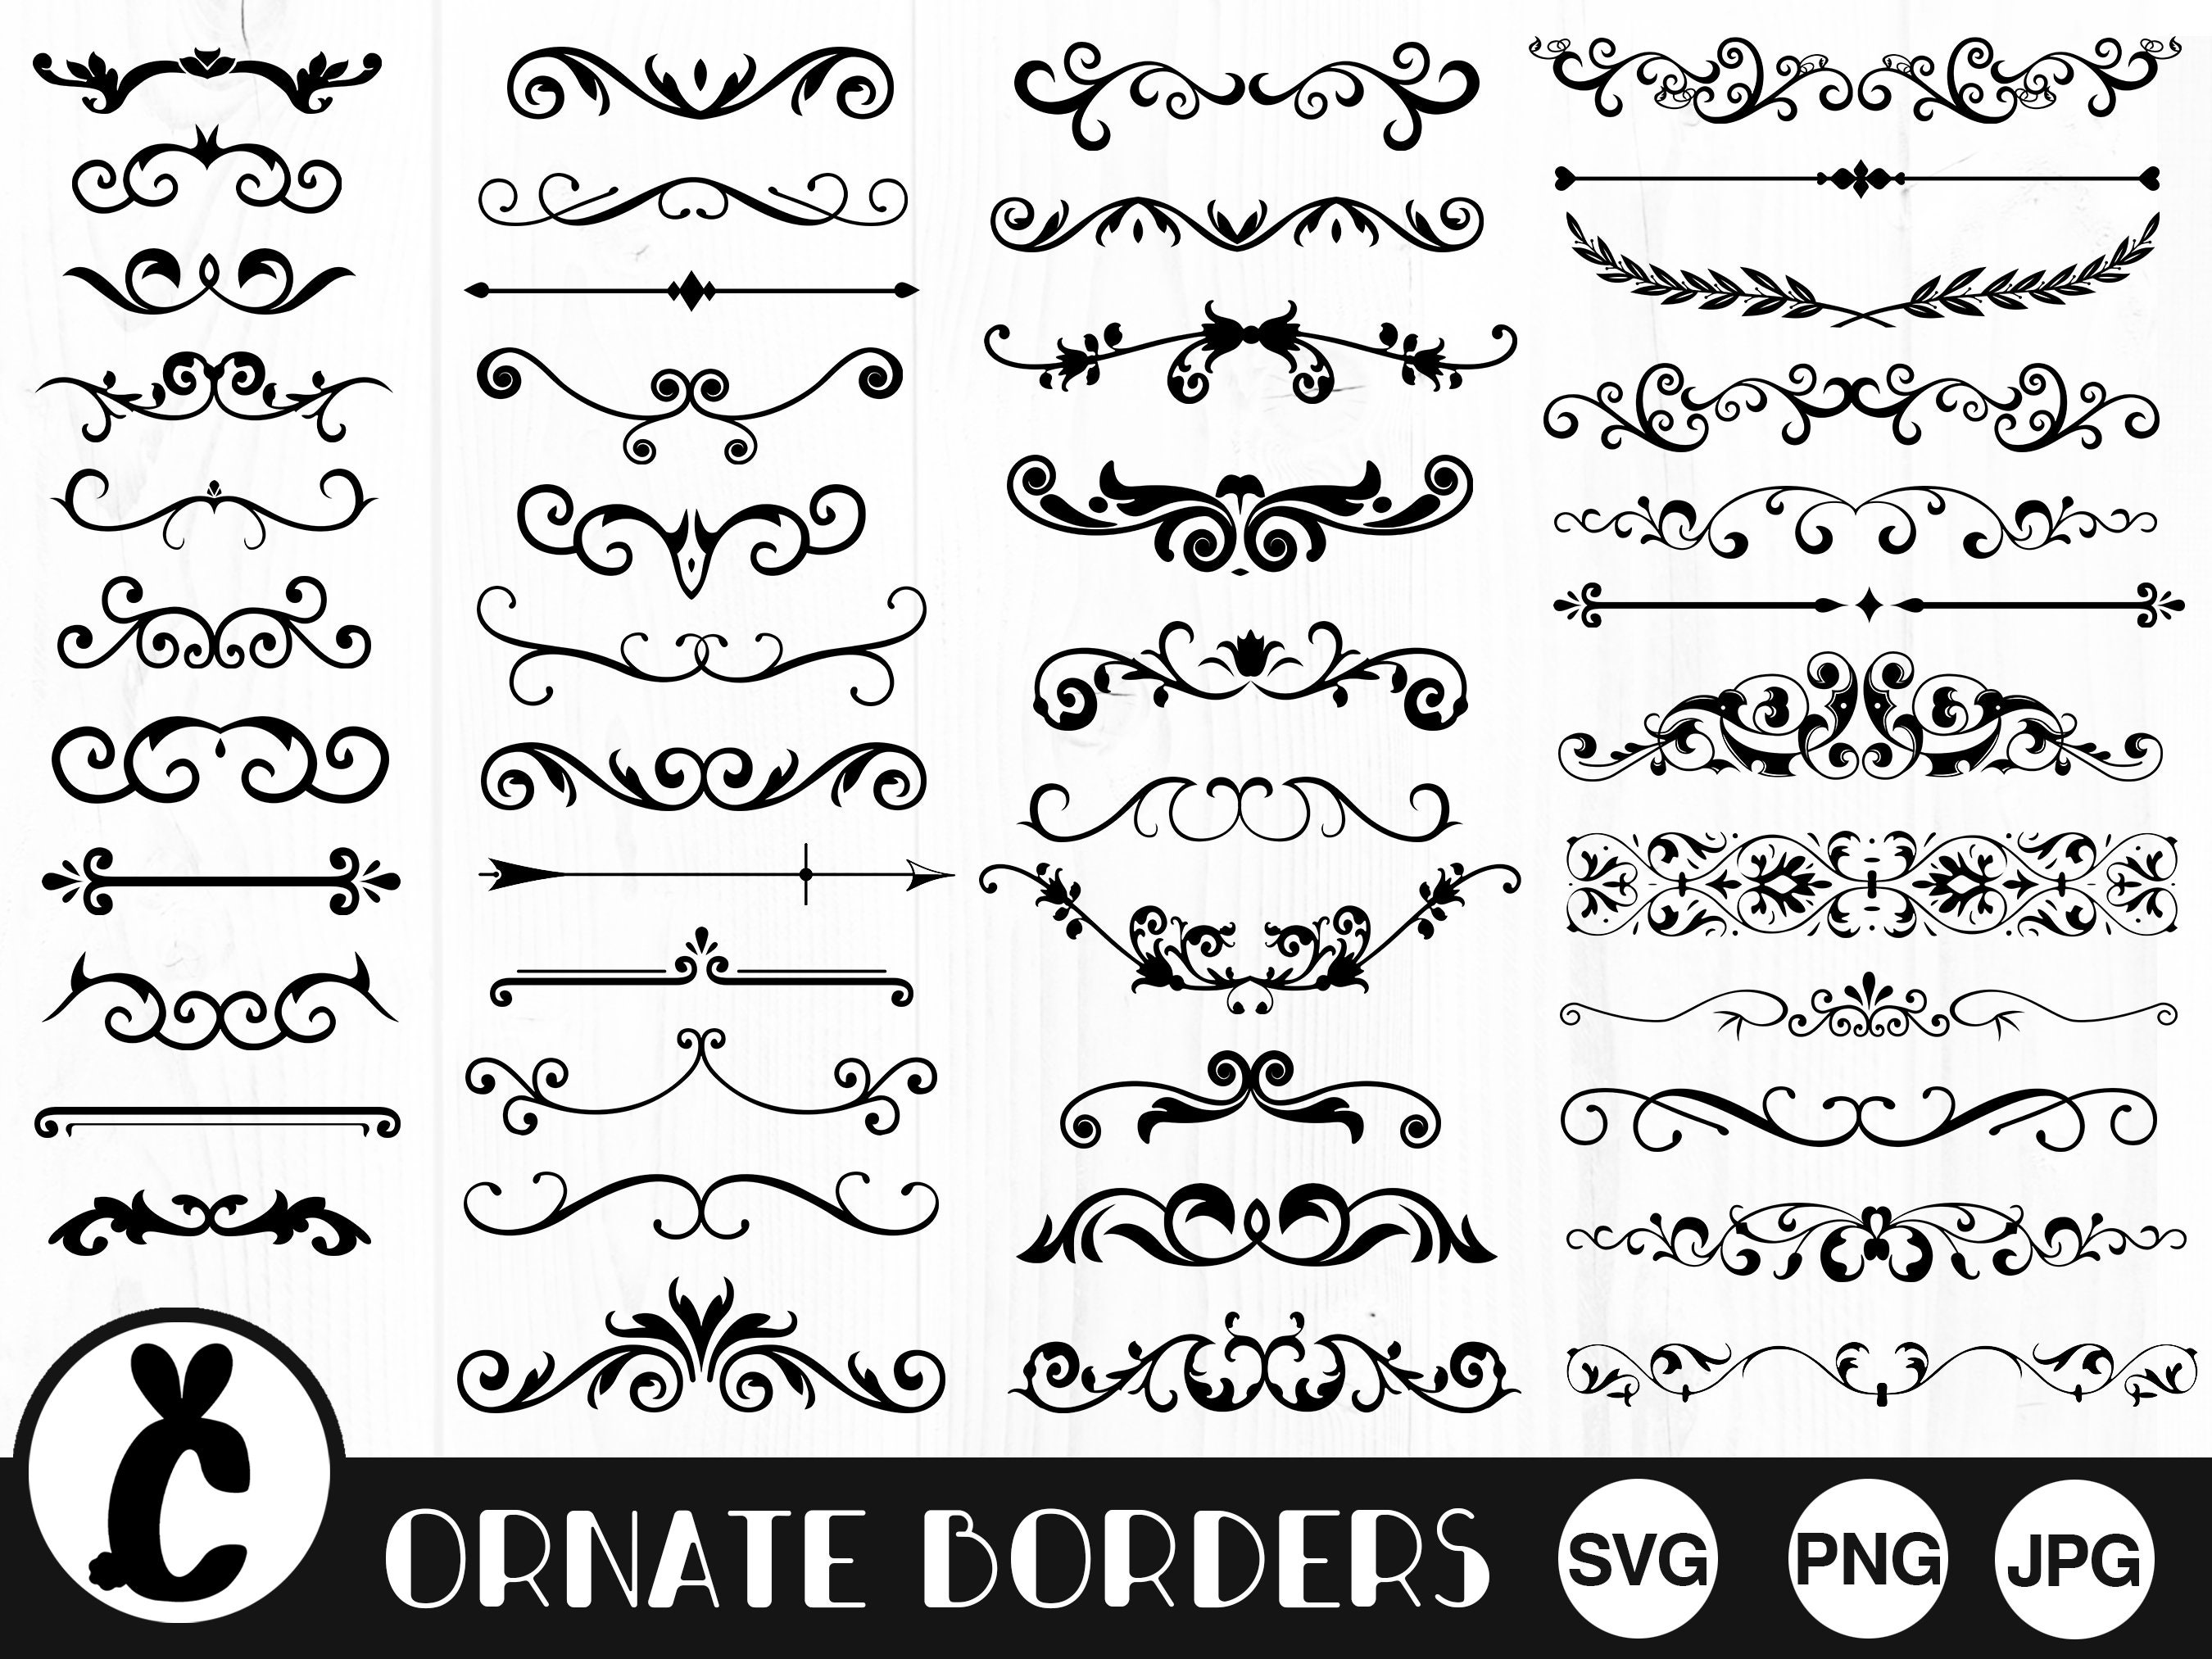 Free Vintage Grunge Vector and Clip Art Ornaments for T-Shirt Design